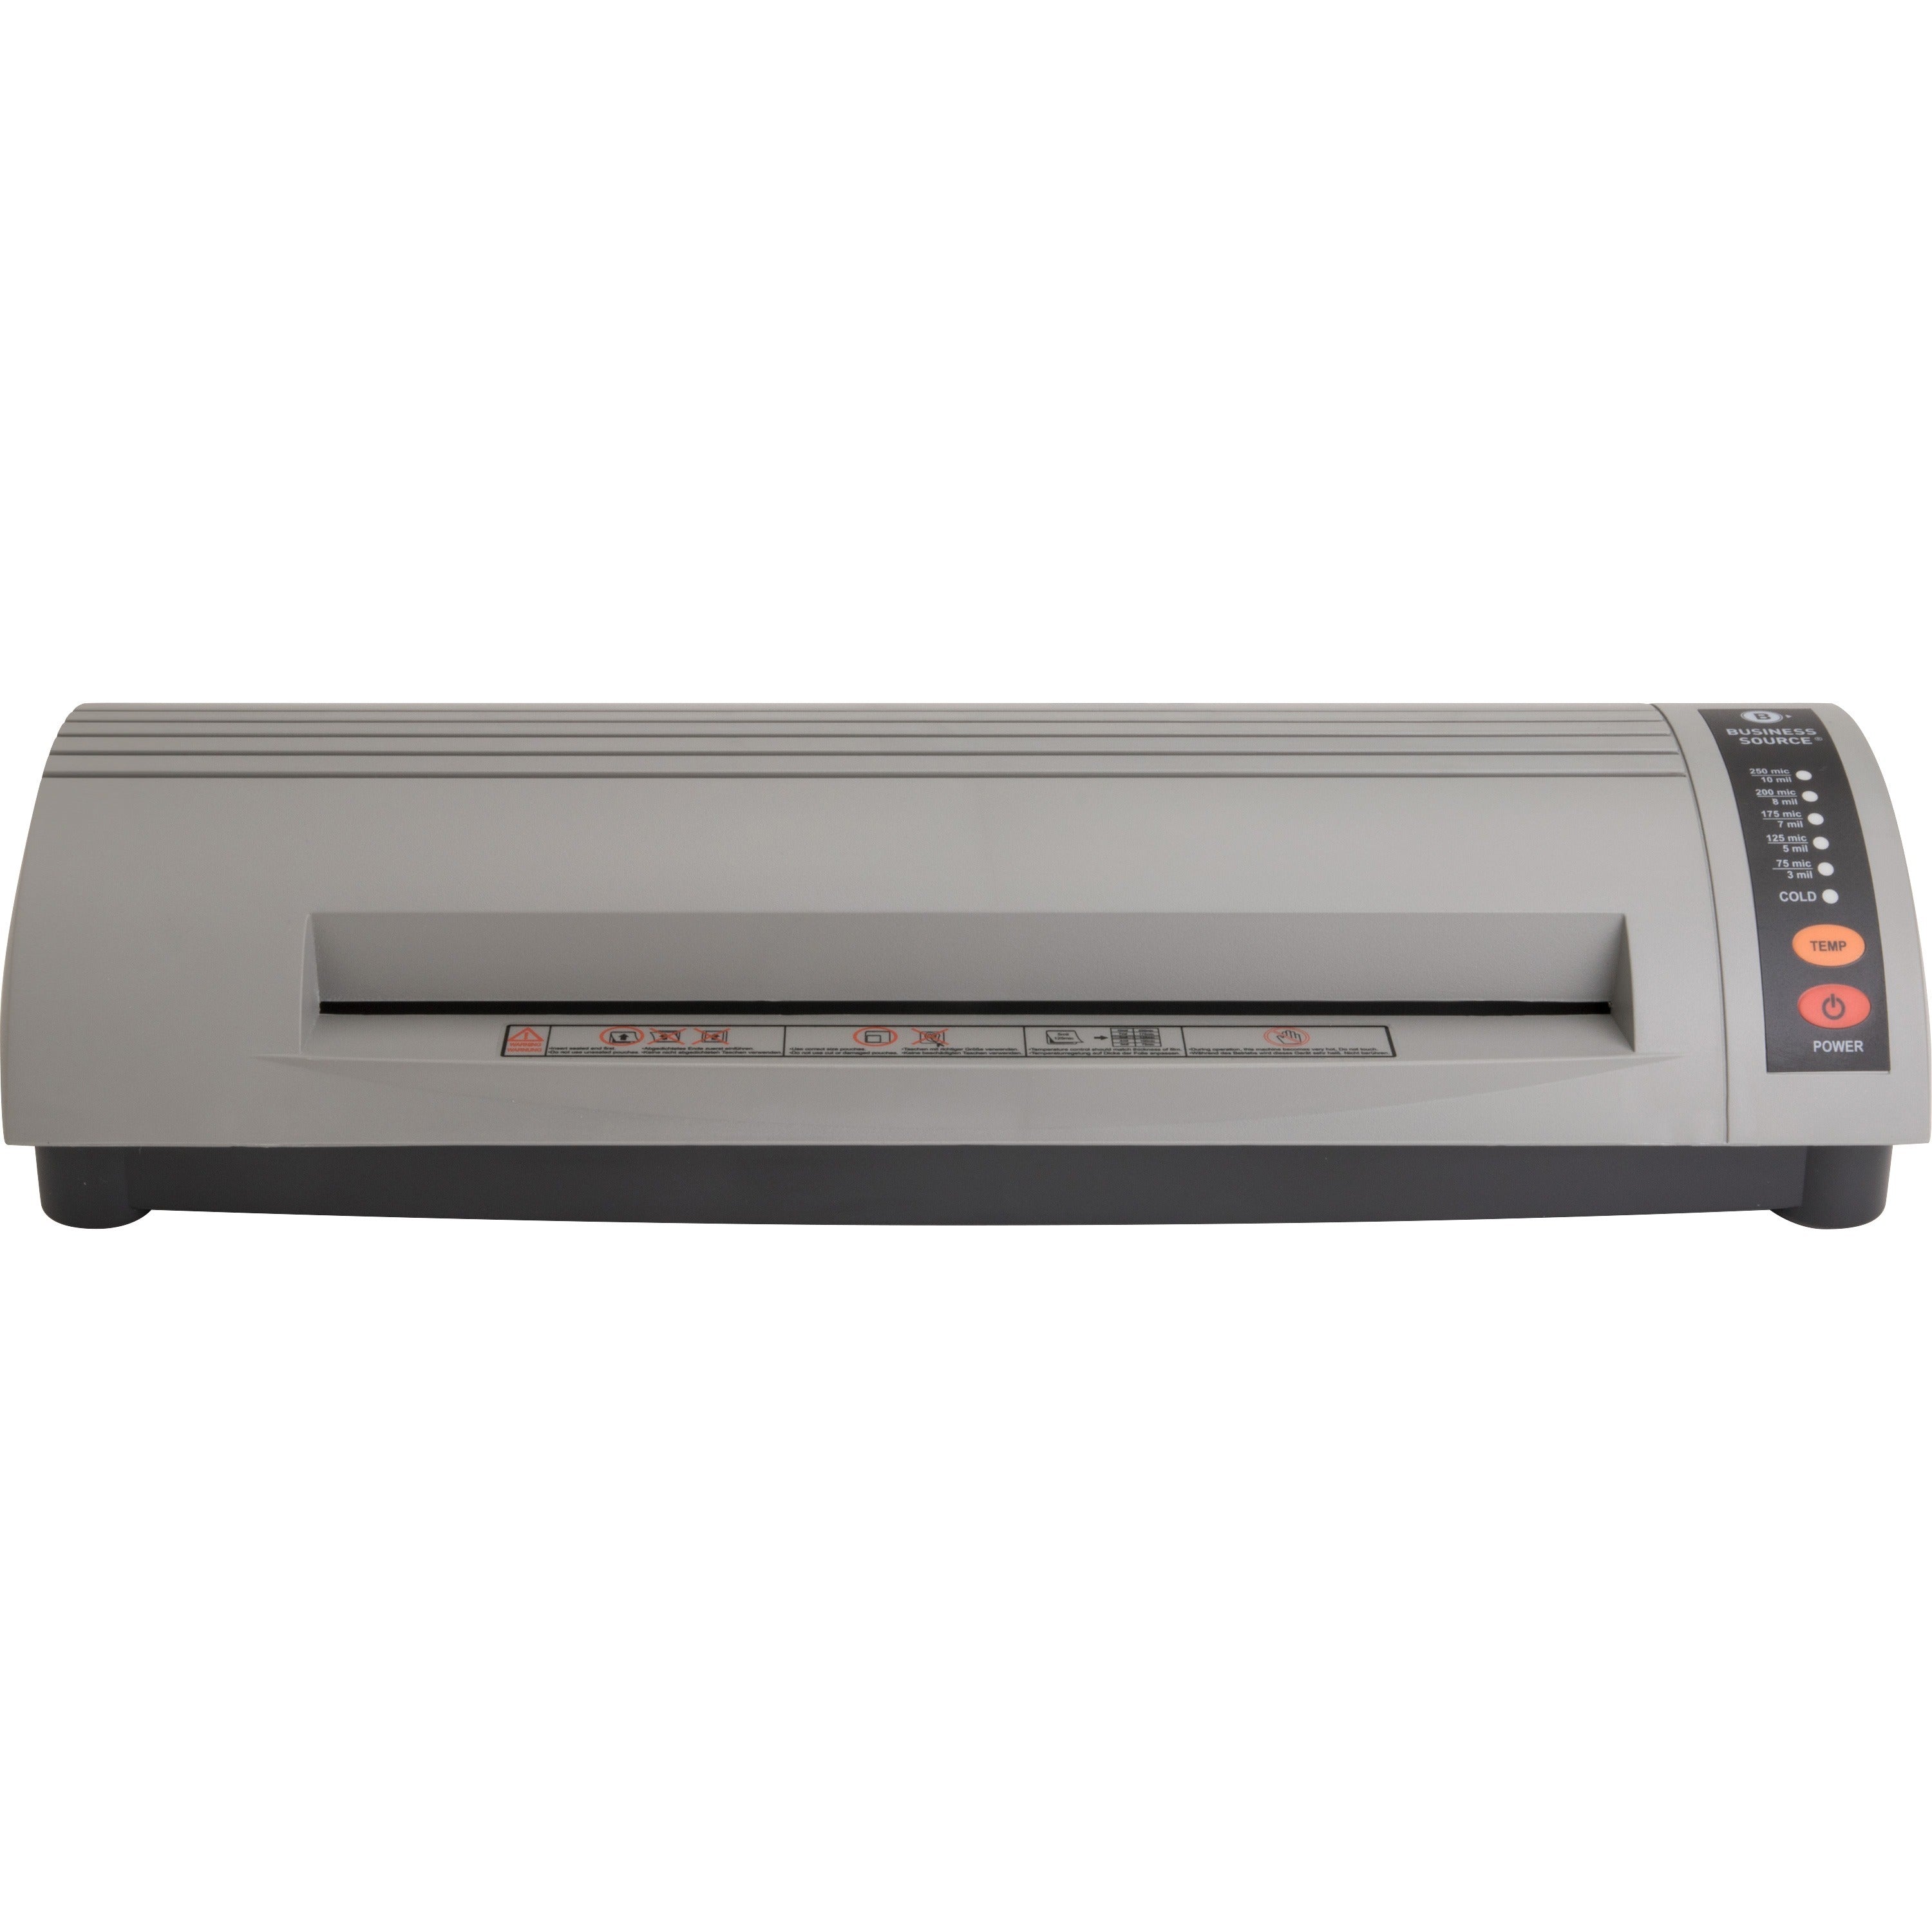 Business Source 12" Professional Document Laminator - 12" Lamination Width - 10 mil Lamination Thickness - 